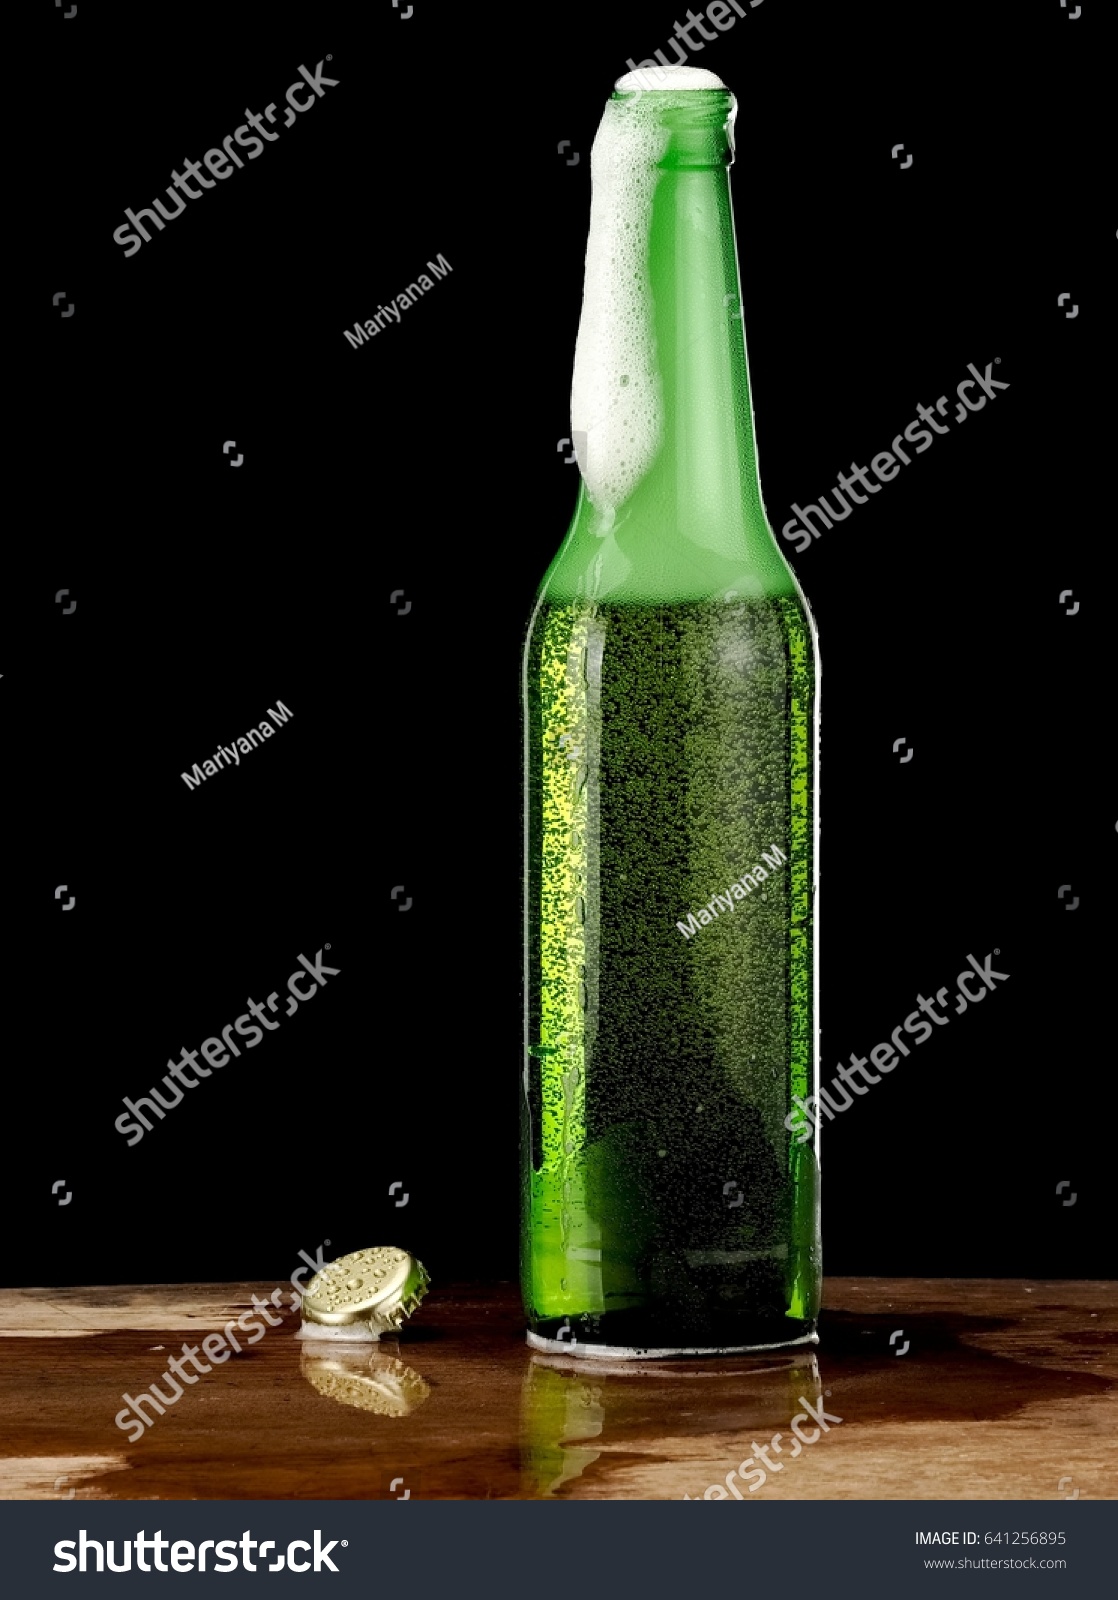 Download Opened Green Beer Bottle Bubbles Foam Food And Drink Stock Image 641256895 Yellowimages Mockups